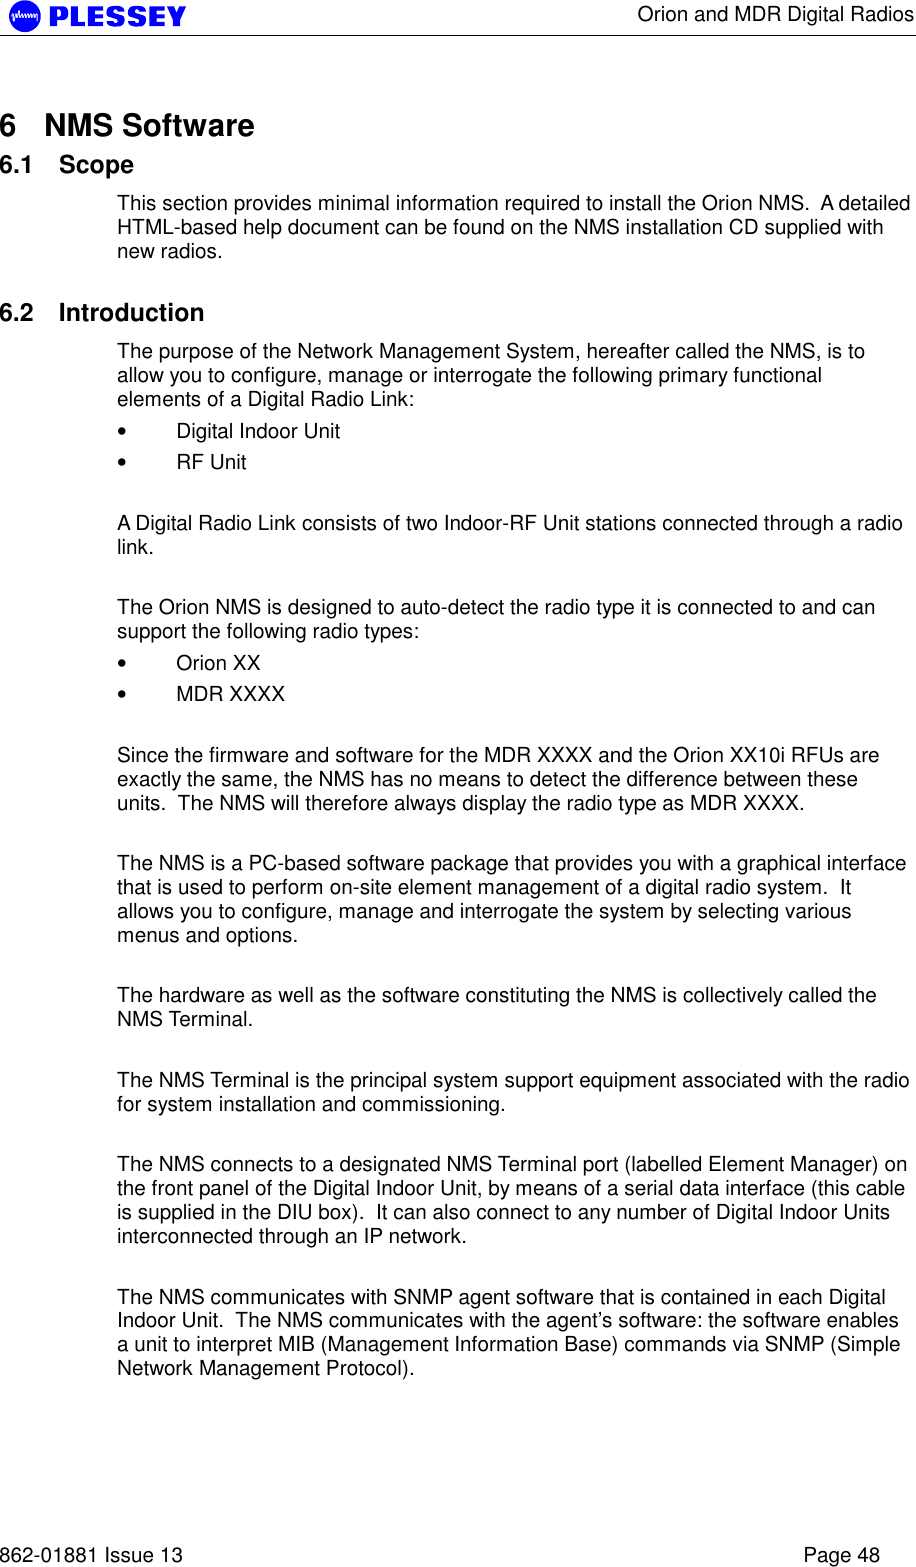      Orion and MDR Digital Radios   862-01881 Issue 13    Page 48 6 NMS Software 6.1 Scope This section provides minimal information required to install the Orion NMS.  A detailed HTML-based help document can be found on the NMS installation CD supplied with new radios.  6.2 Introduction The purpose of the Network Management System, hereafter called the NMS, is to allow you to configure, manage or interrogate the following primary functional elements of a Digital Radio Link: • Digital Indoor Unit  • RF Unit    A Digital Radio Link consists of two Indoor-RF Unit stations connected through a radio link.   The Orion NMS is designed to auto-detect the radio type it is connected to and can support the following radio types: • Orion XX • MDR XXXX   Since the firmware and software for the MDR XXXX and the Orion XX10i RFUs are exactly the same, the NMS has no means to detect the difference between these units.  The NMS will therefore always display the radio type as MDR XXXX.    The NMS is a PC-based software package that provides you with a graphical interface that is used to perform on-site element management of a digital radio system.  It allows you to configure, manage and interrogate the system by selecting various menus and options.   The hardware as well as the software constituting the NMS is collectively called the NMS Terminal.  The NMS Terminal is the principal system support equipment associated with the radio for system installation and commissioning.   The NMS connects to a designated NMS Terminal port (labelled Element Manager) on the front panel of the Digital Indoor Unit, by means of a serial data interface (this cable is supplied in the DIU box).  It can also connect to any number of Digital Indoor Units interconnected through an IP network.   The NMS communicates with SNMP agent software that is contained in each Digital Indoor Unit.  The NMS communicates with the agent’s software: the software enables a unit to interpret MIB (Management Information Base) commands via SNMP (Simple Network Management Protocol).  